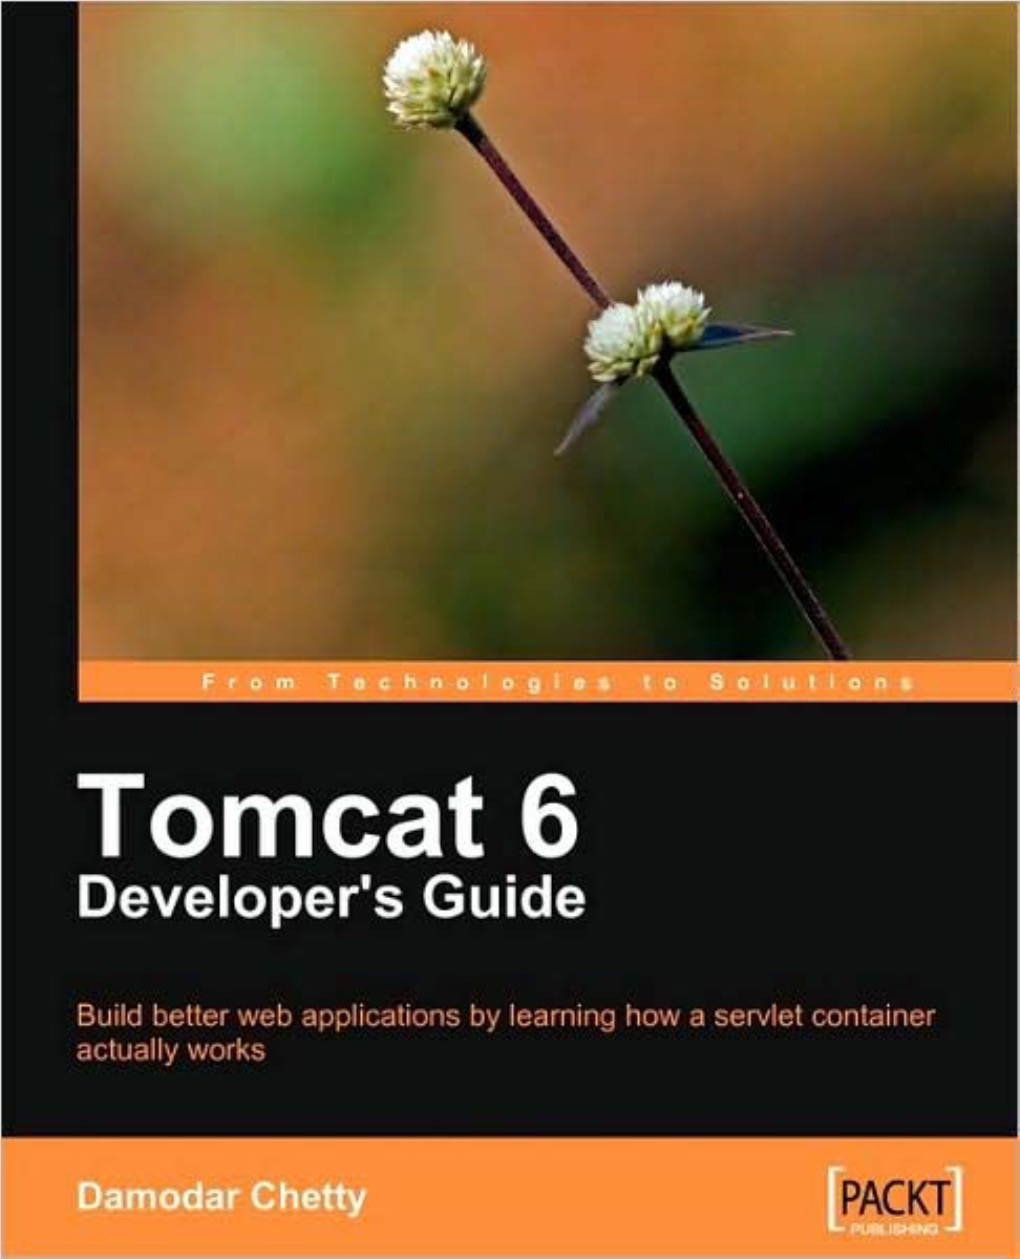 Tomcat 6 Developer's Guide: Build Better Web Applications by Learning How a Servlet Container Actually Works